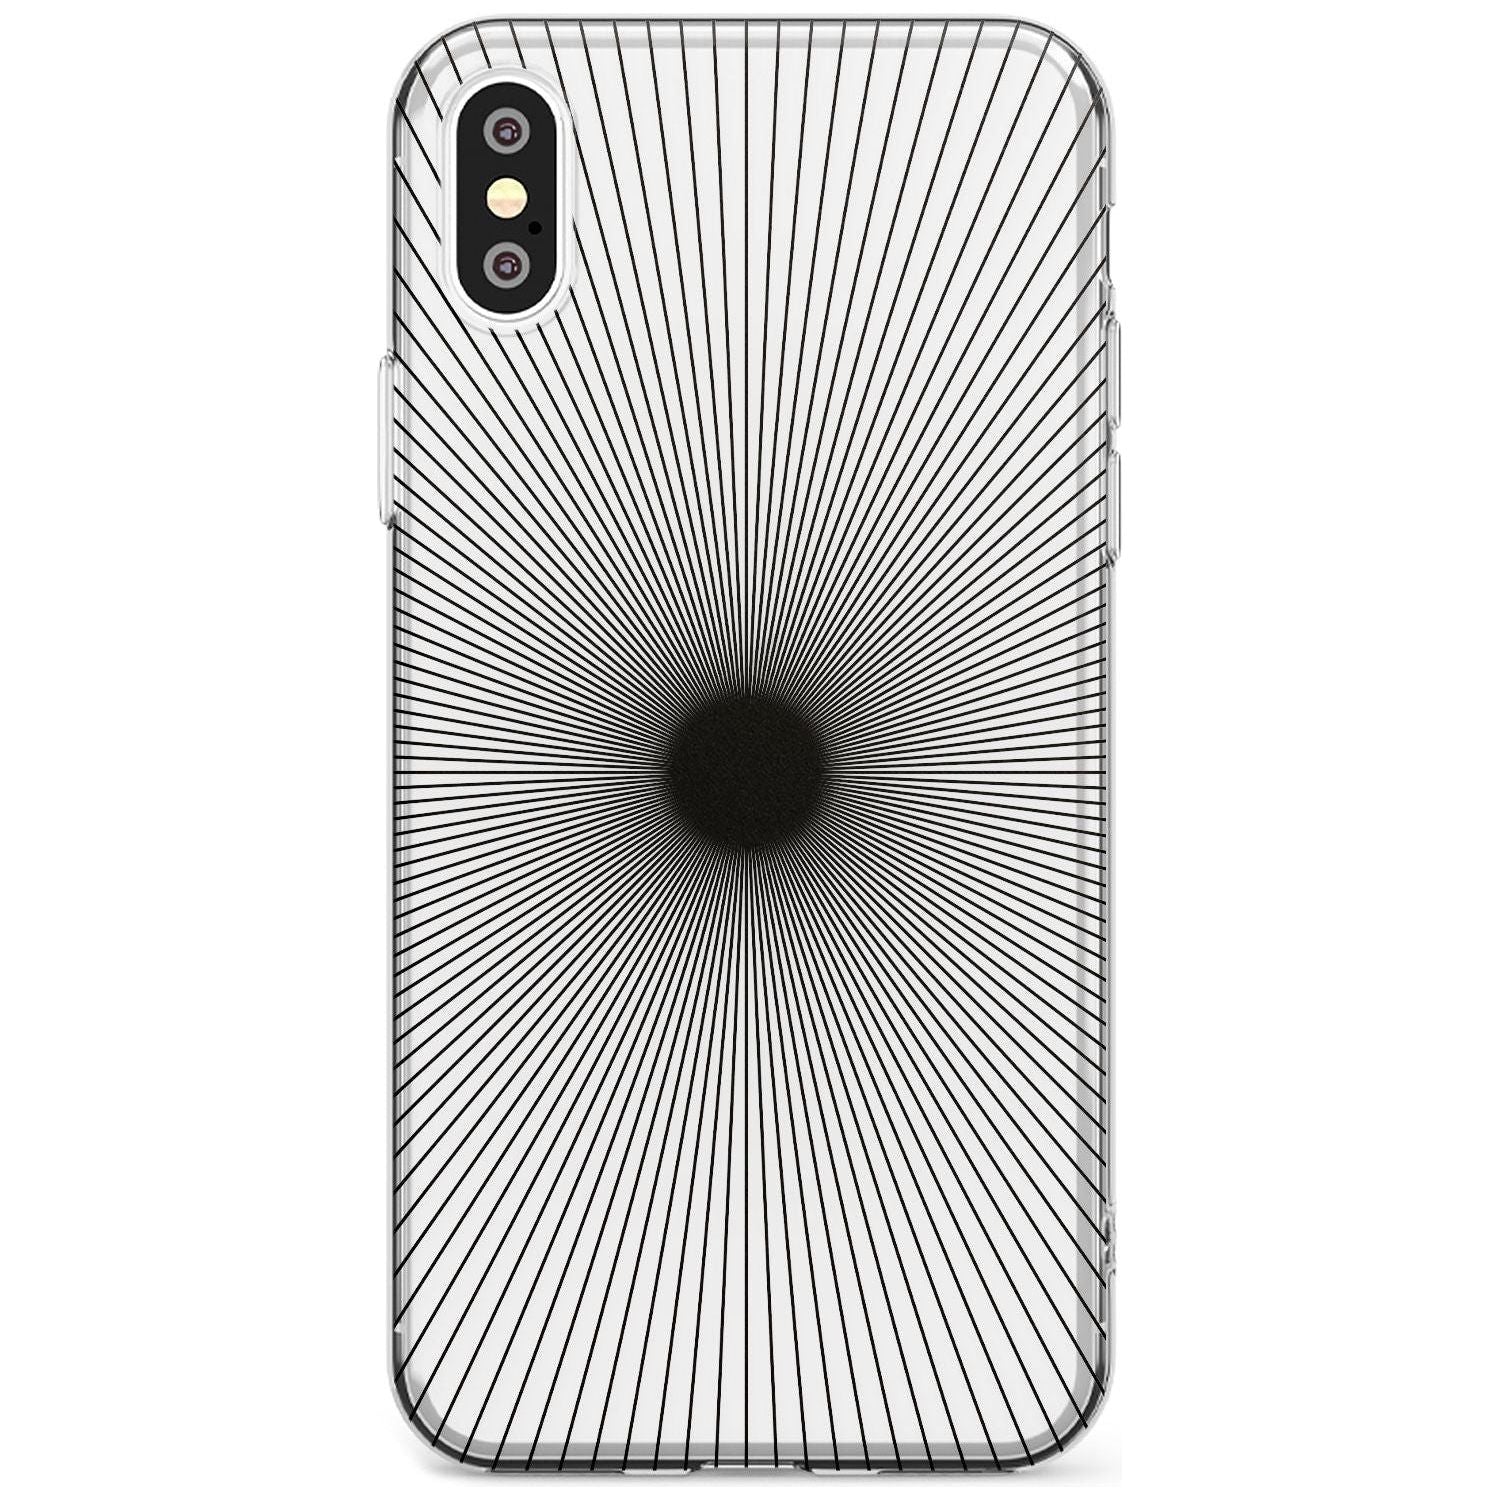 Abstract Lines: Sunburst Black Impact Phone Case for iPhone X XS Max XR